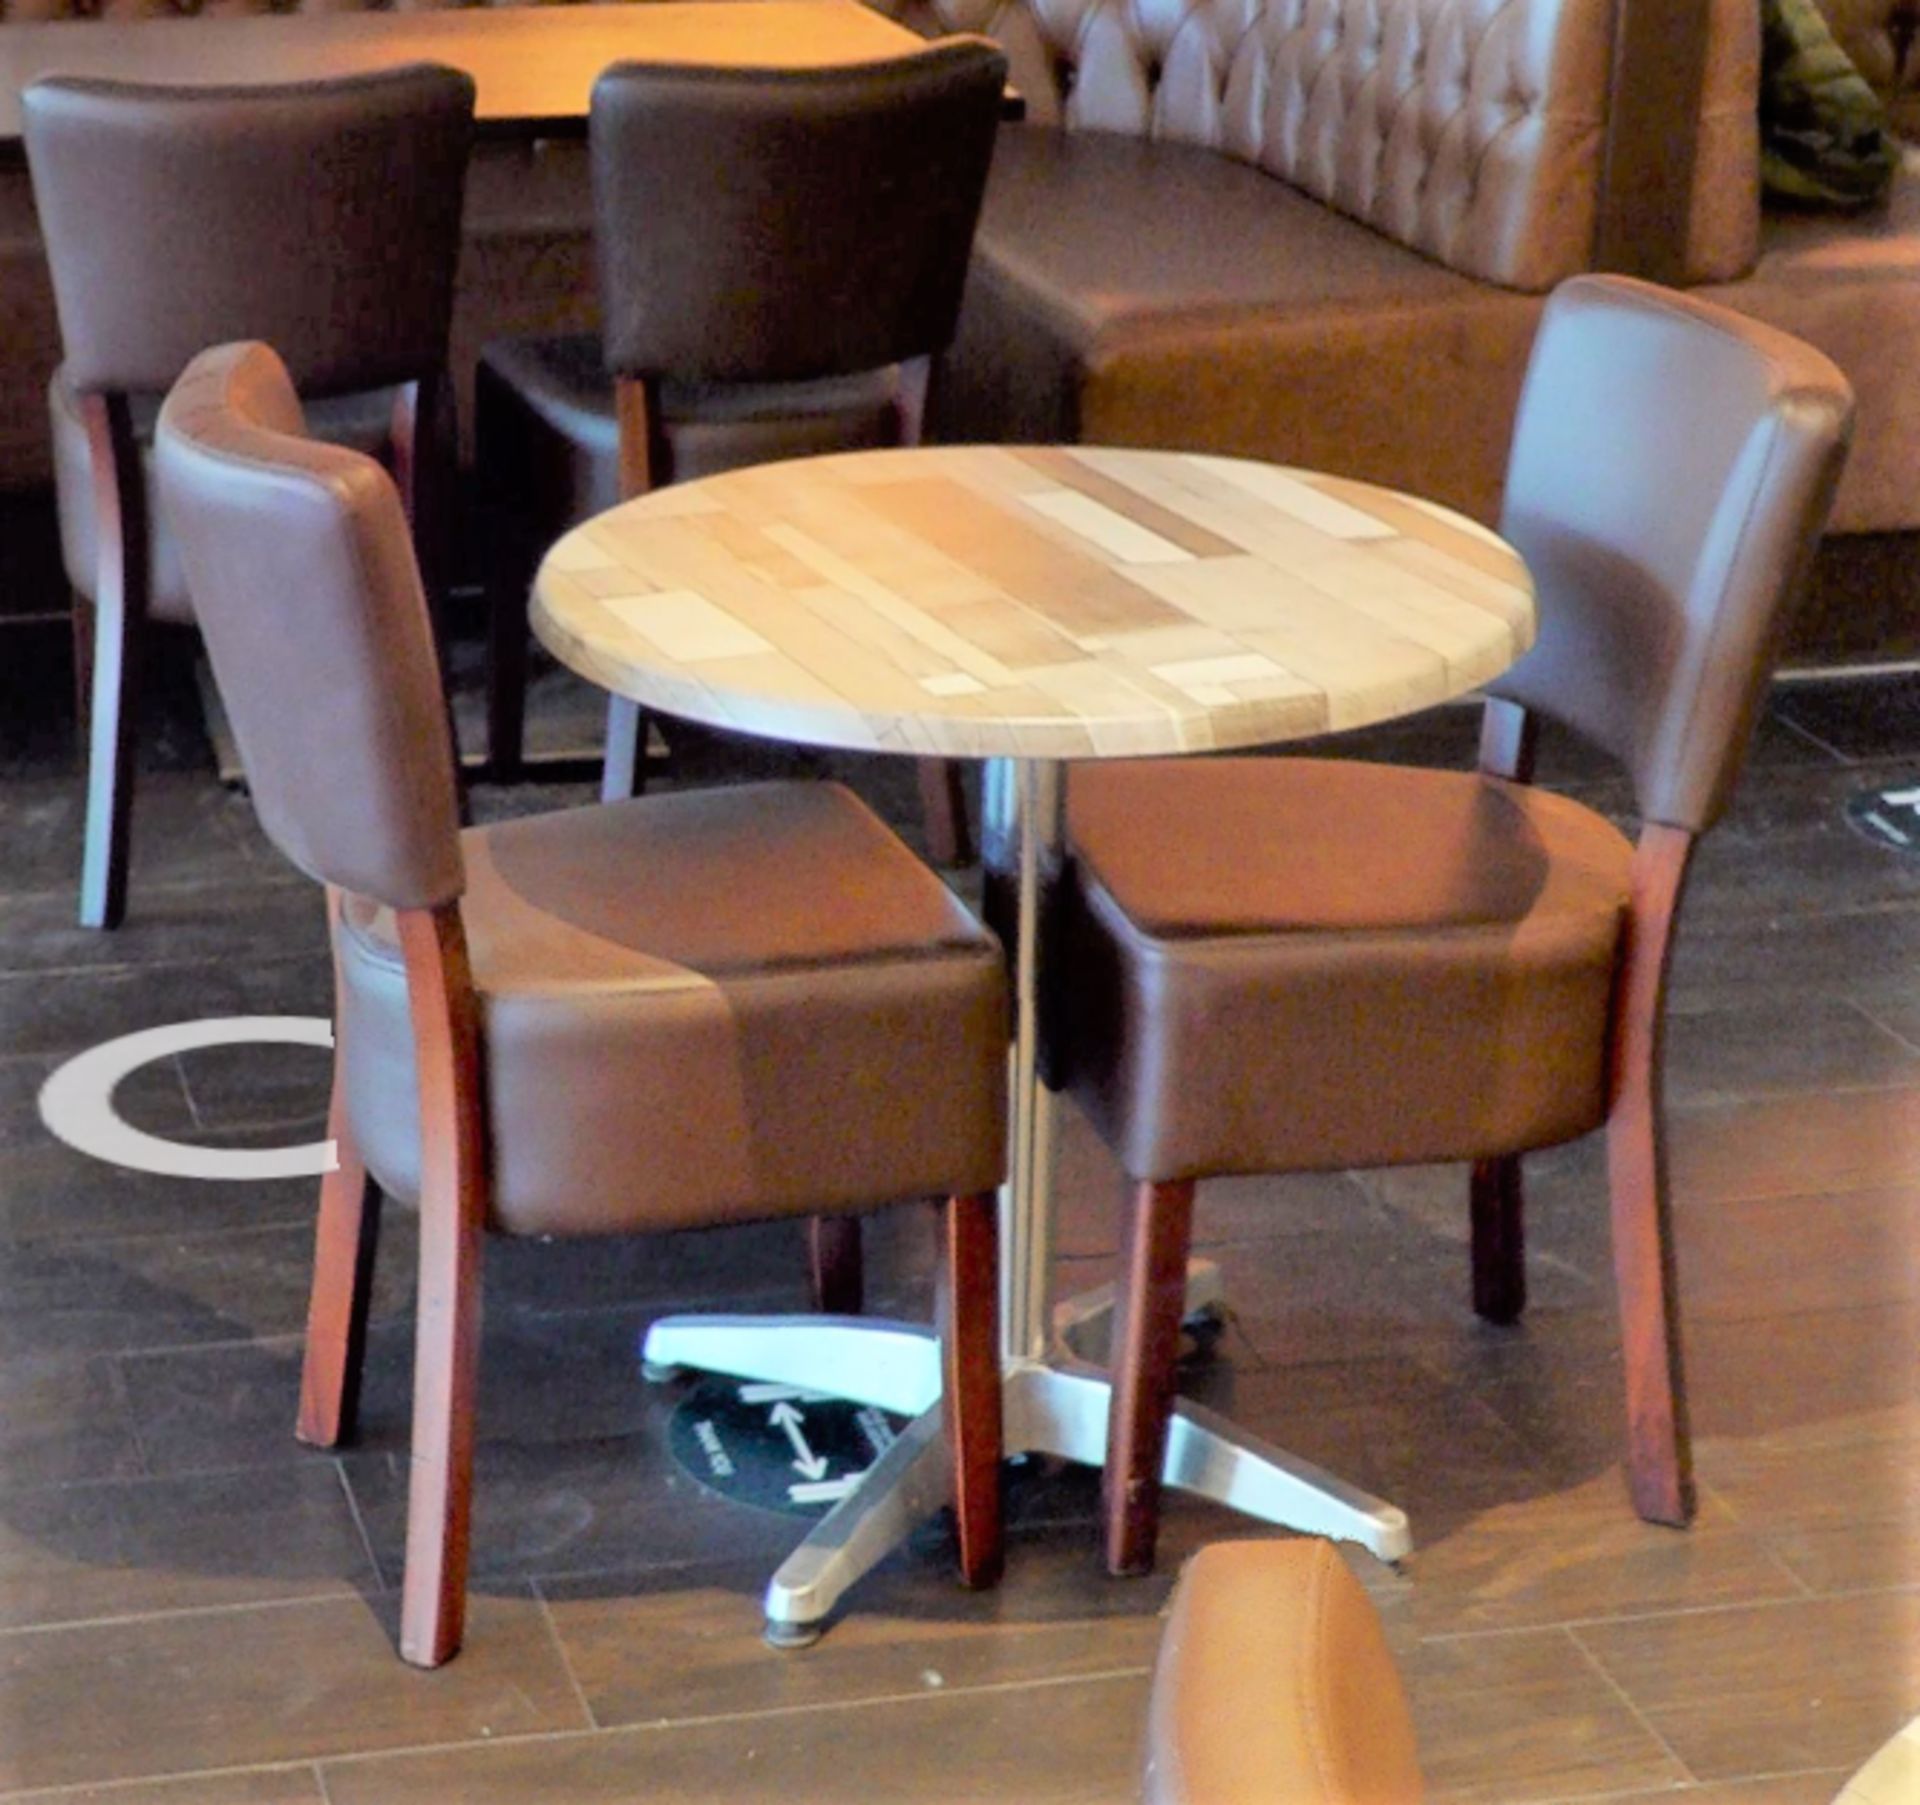 4 x Restaurant Chairs With Brown Leather Seat Pads and Padded Backrests - CL701 - Location: Ashton - Image 7 of 9